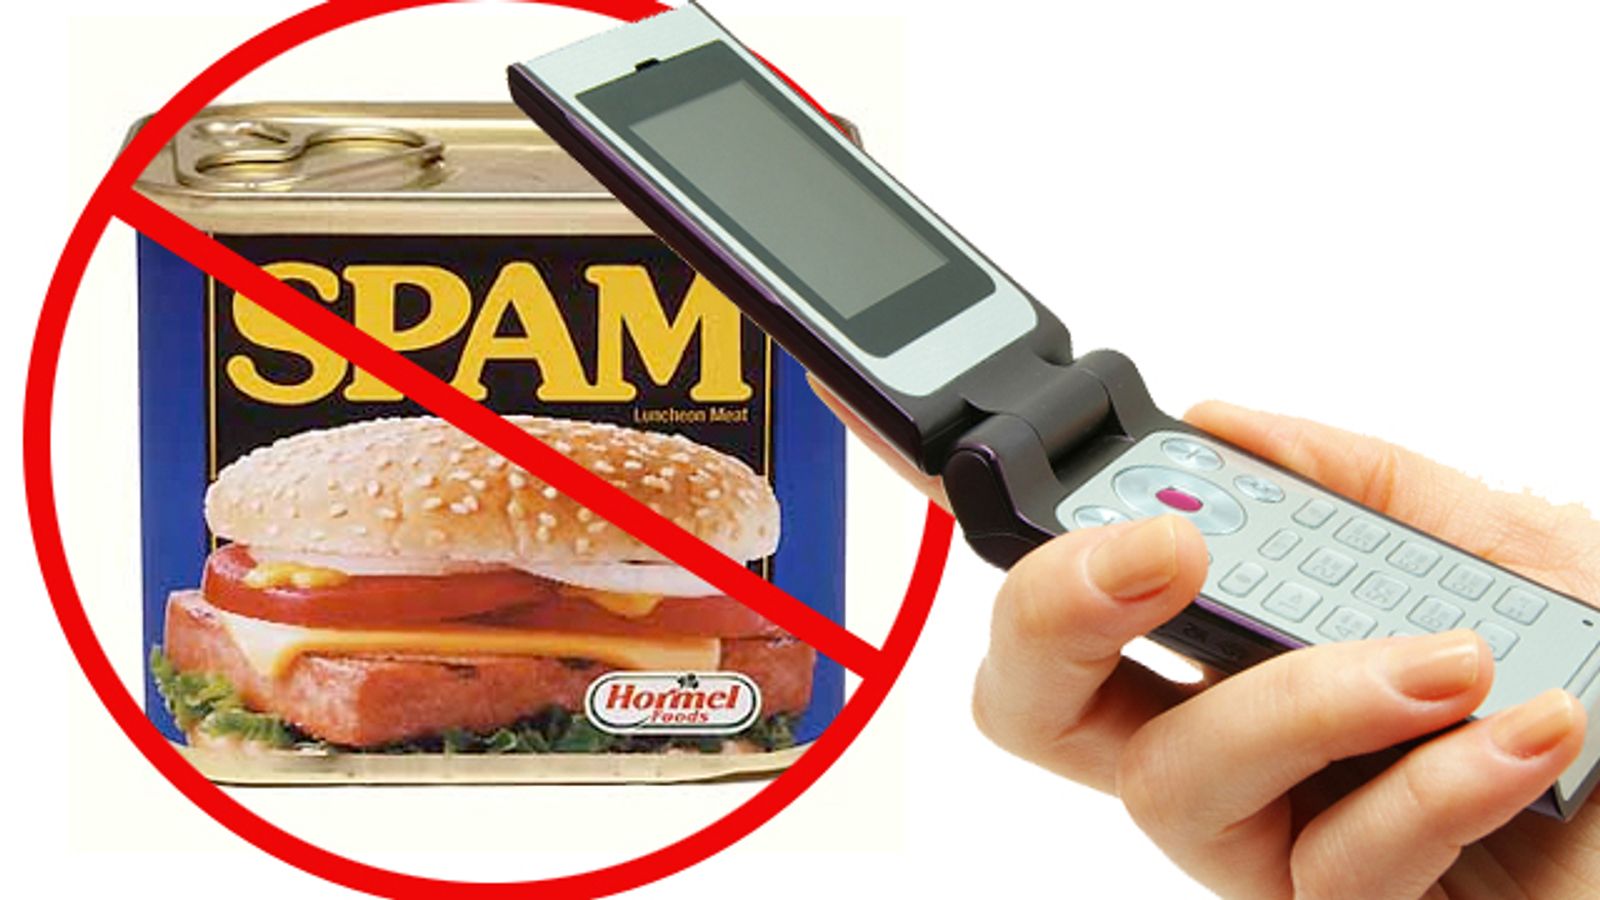 Mobile Phone Anti-Spam Bill Introduced